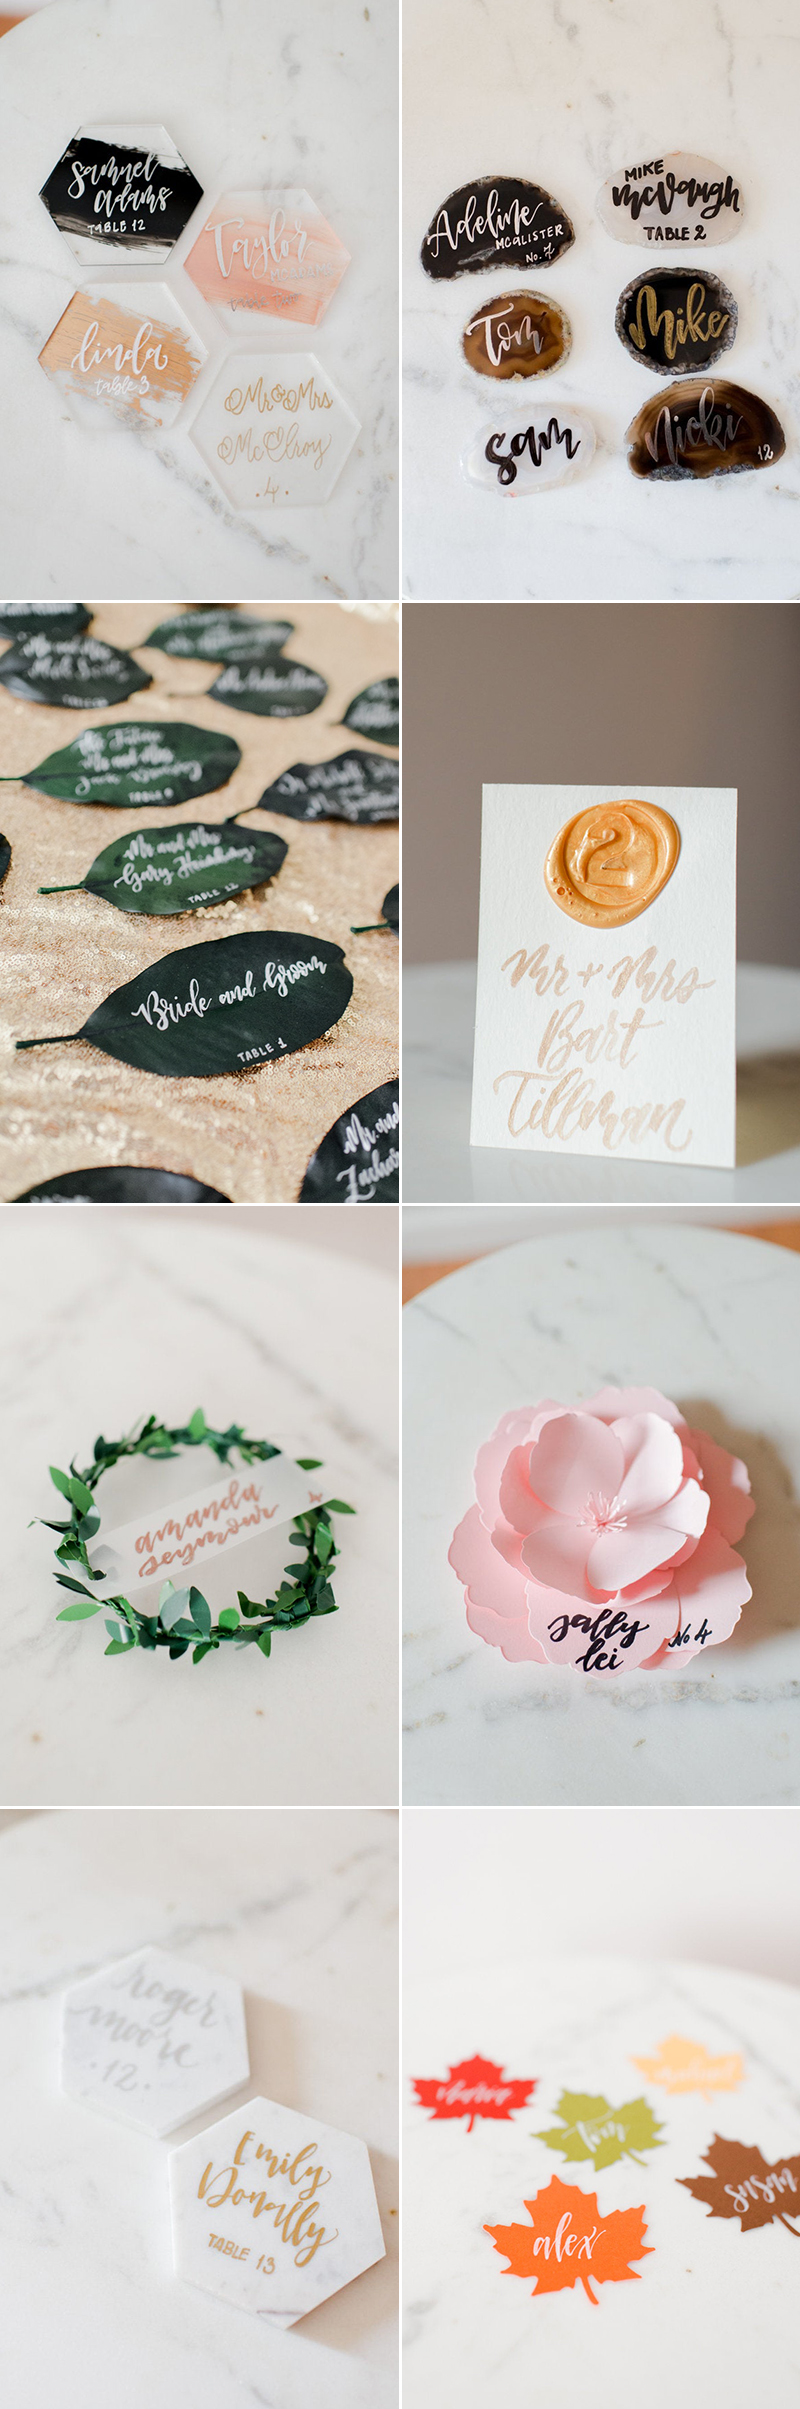 wedding calligraphy place card